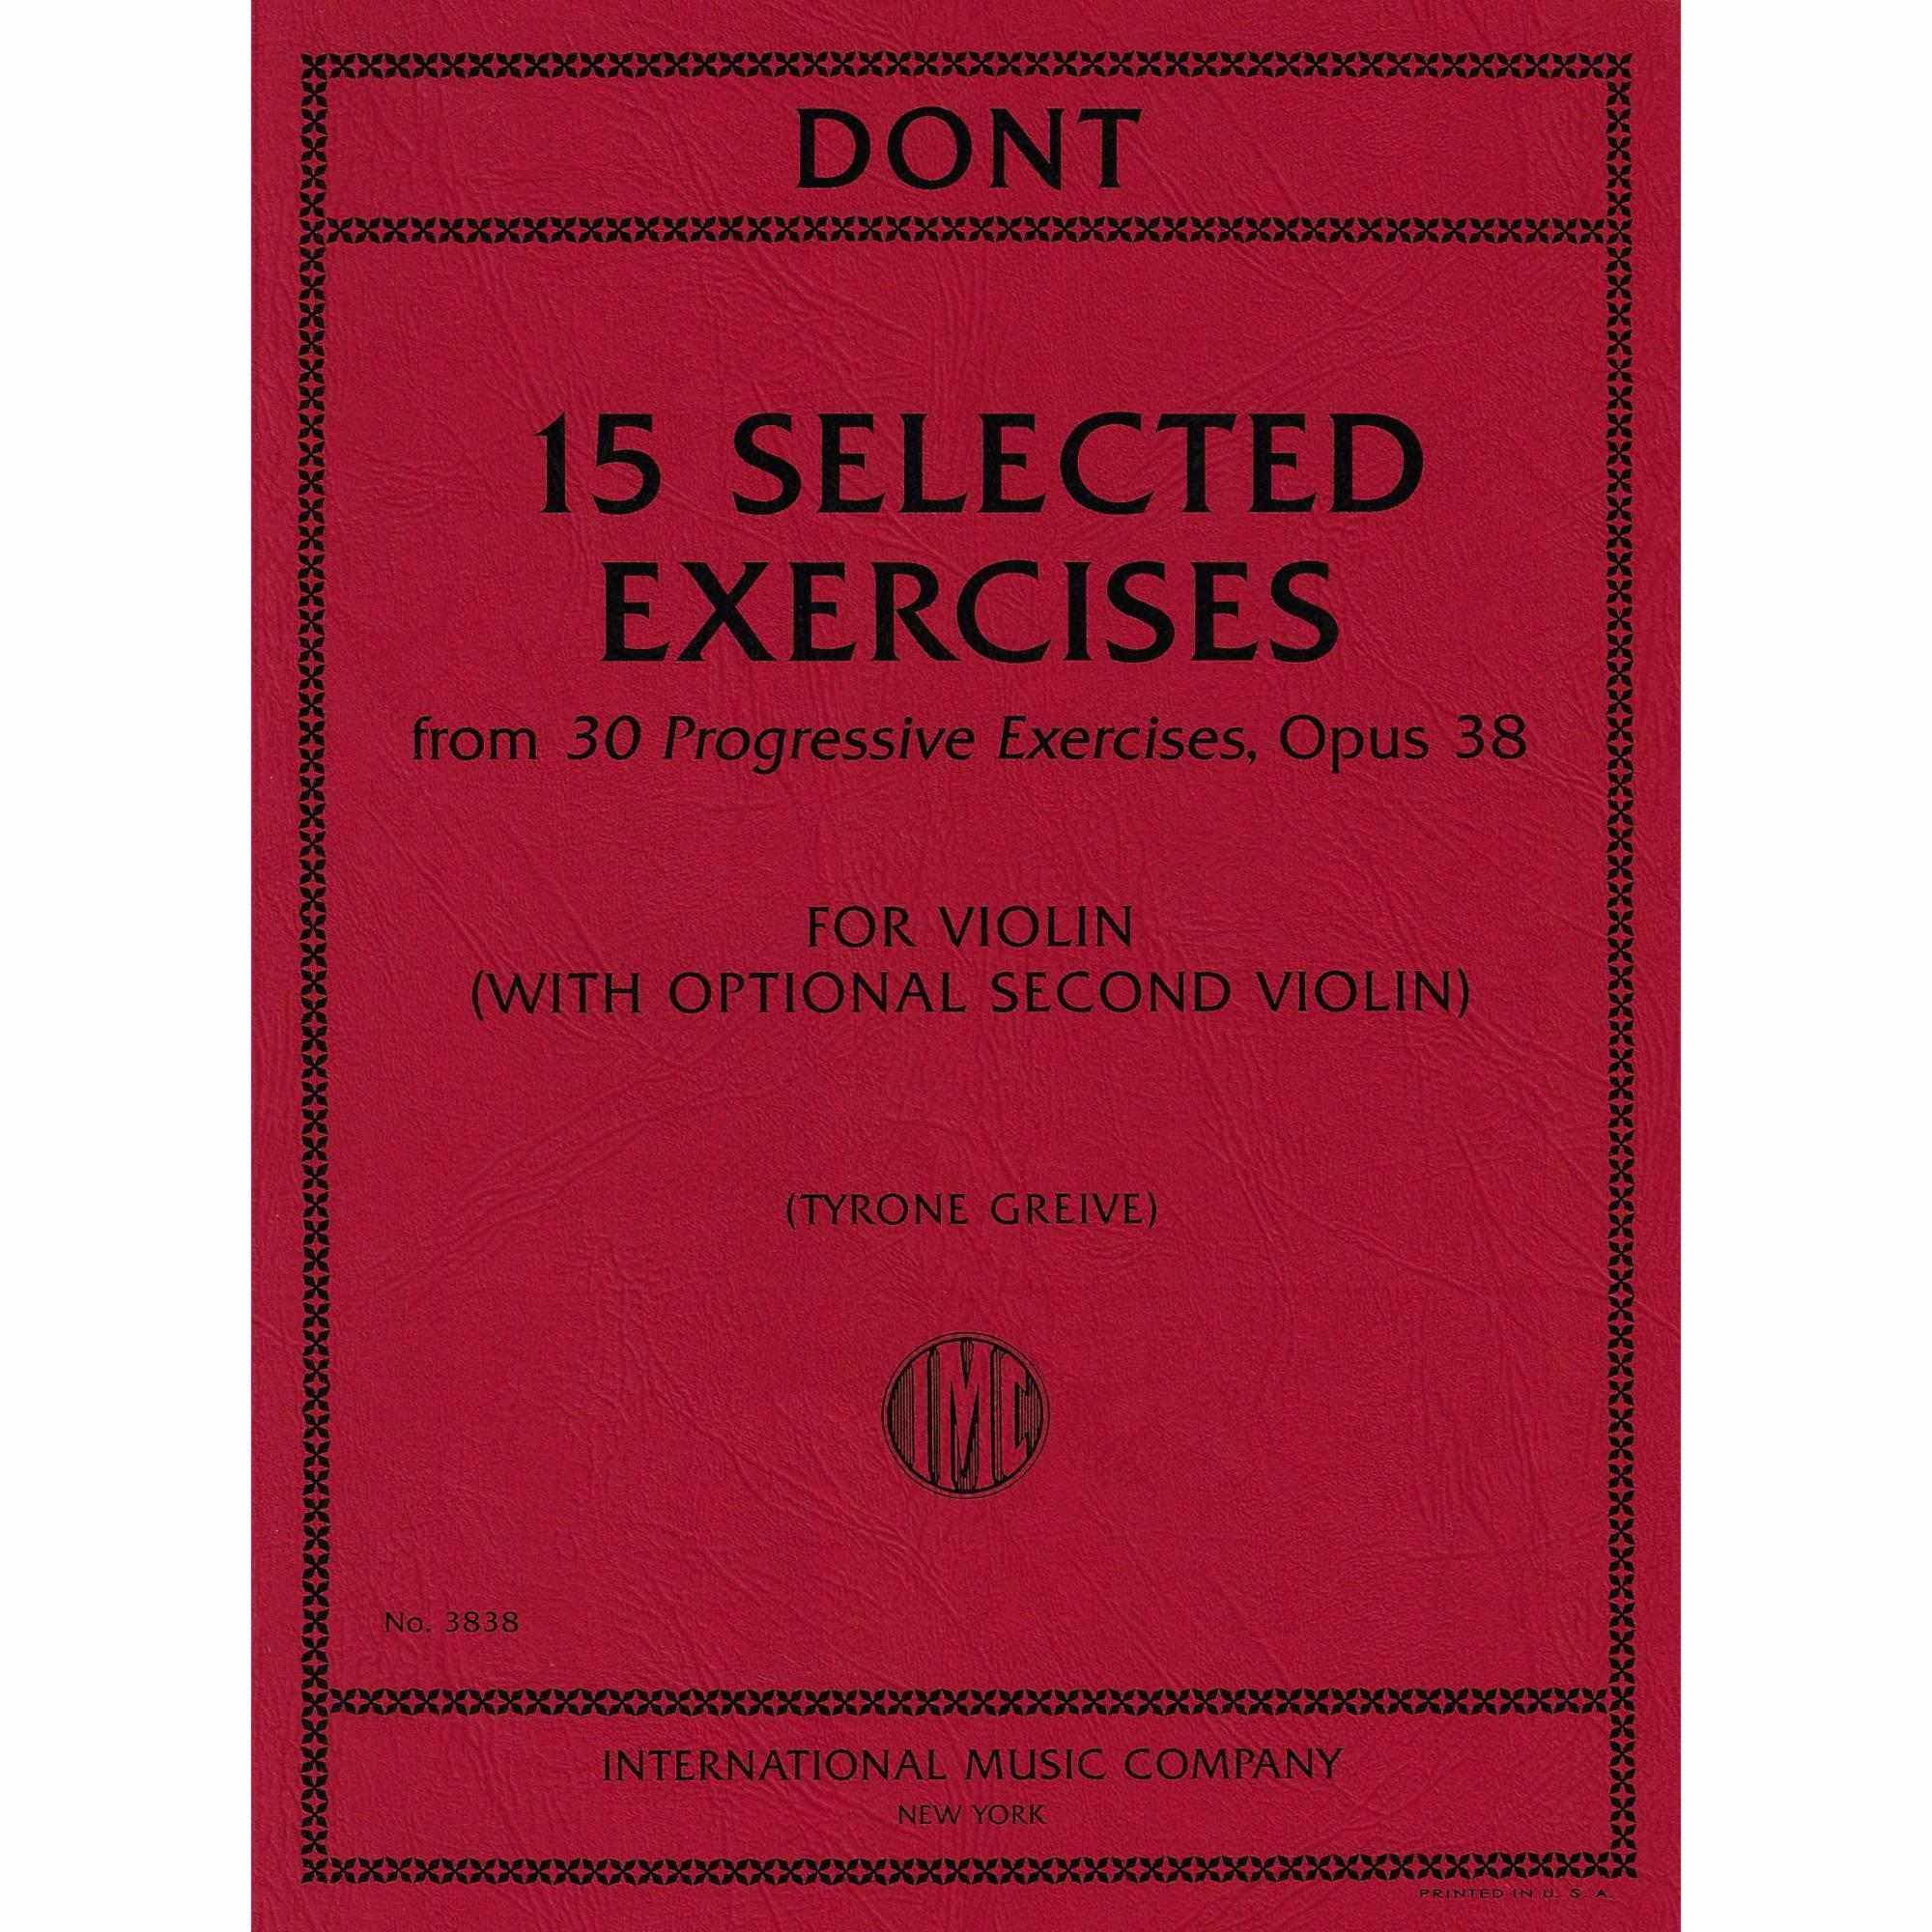 Dont -- 15 Selected Exercises, from 30 Progressive Exercises, Op. 38 for Violin